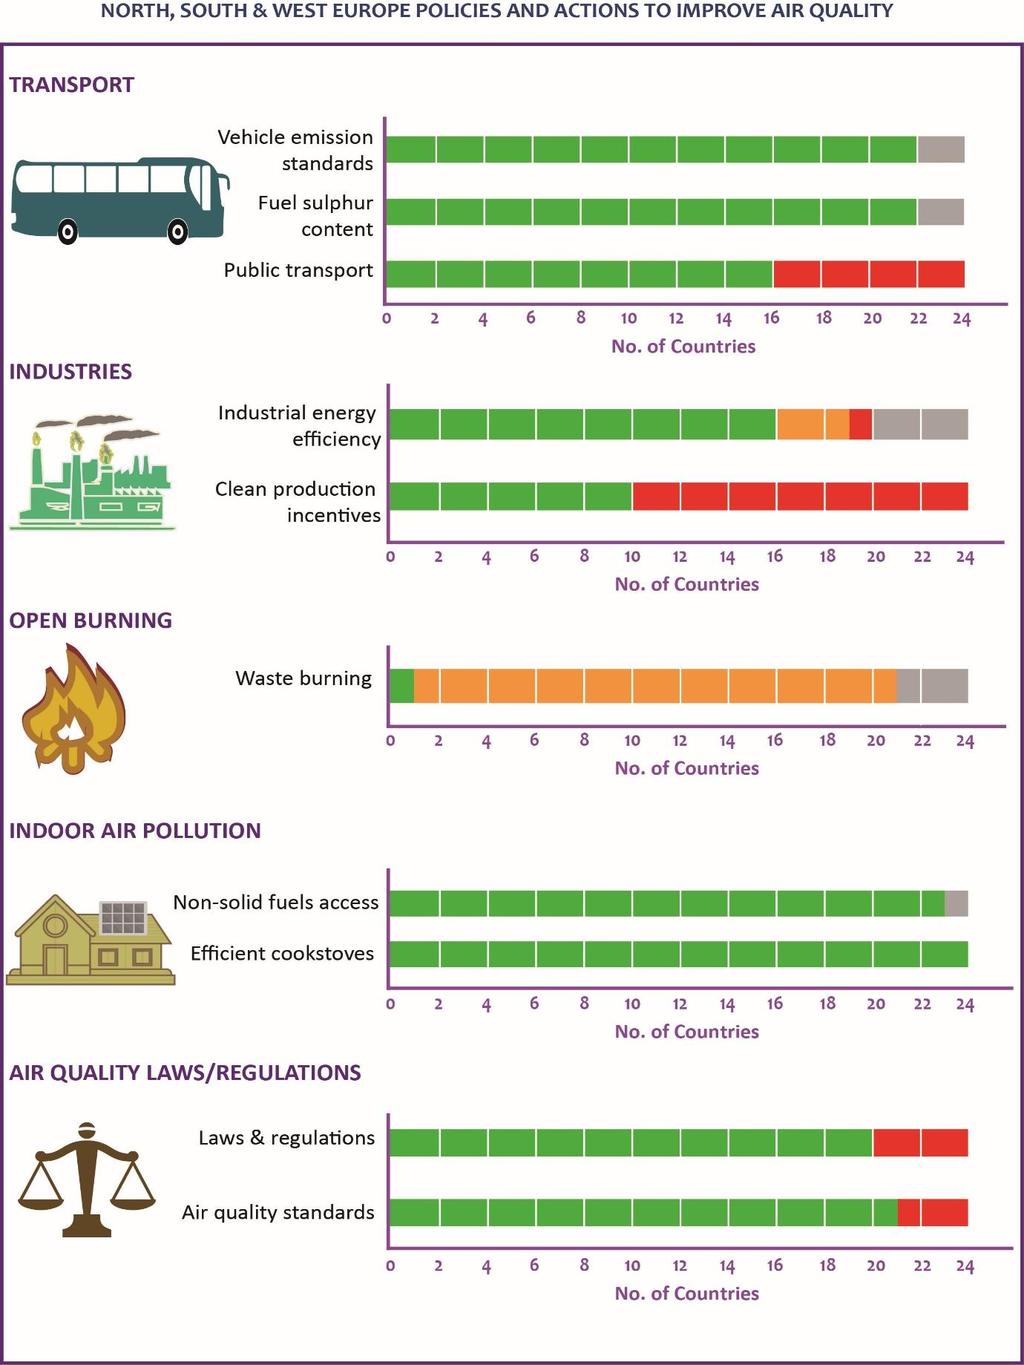 Figure 1: A summary of actions, programmes, policies, laws and regulations undertaken by governments in